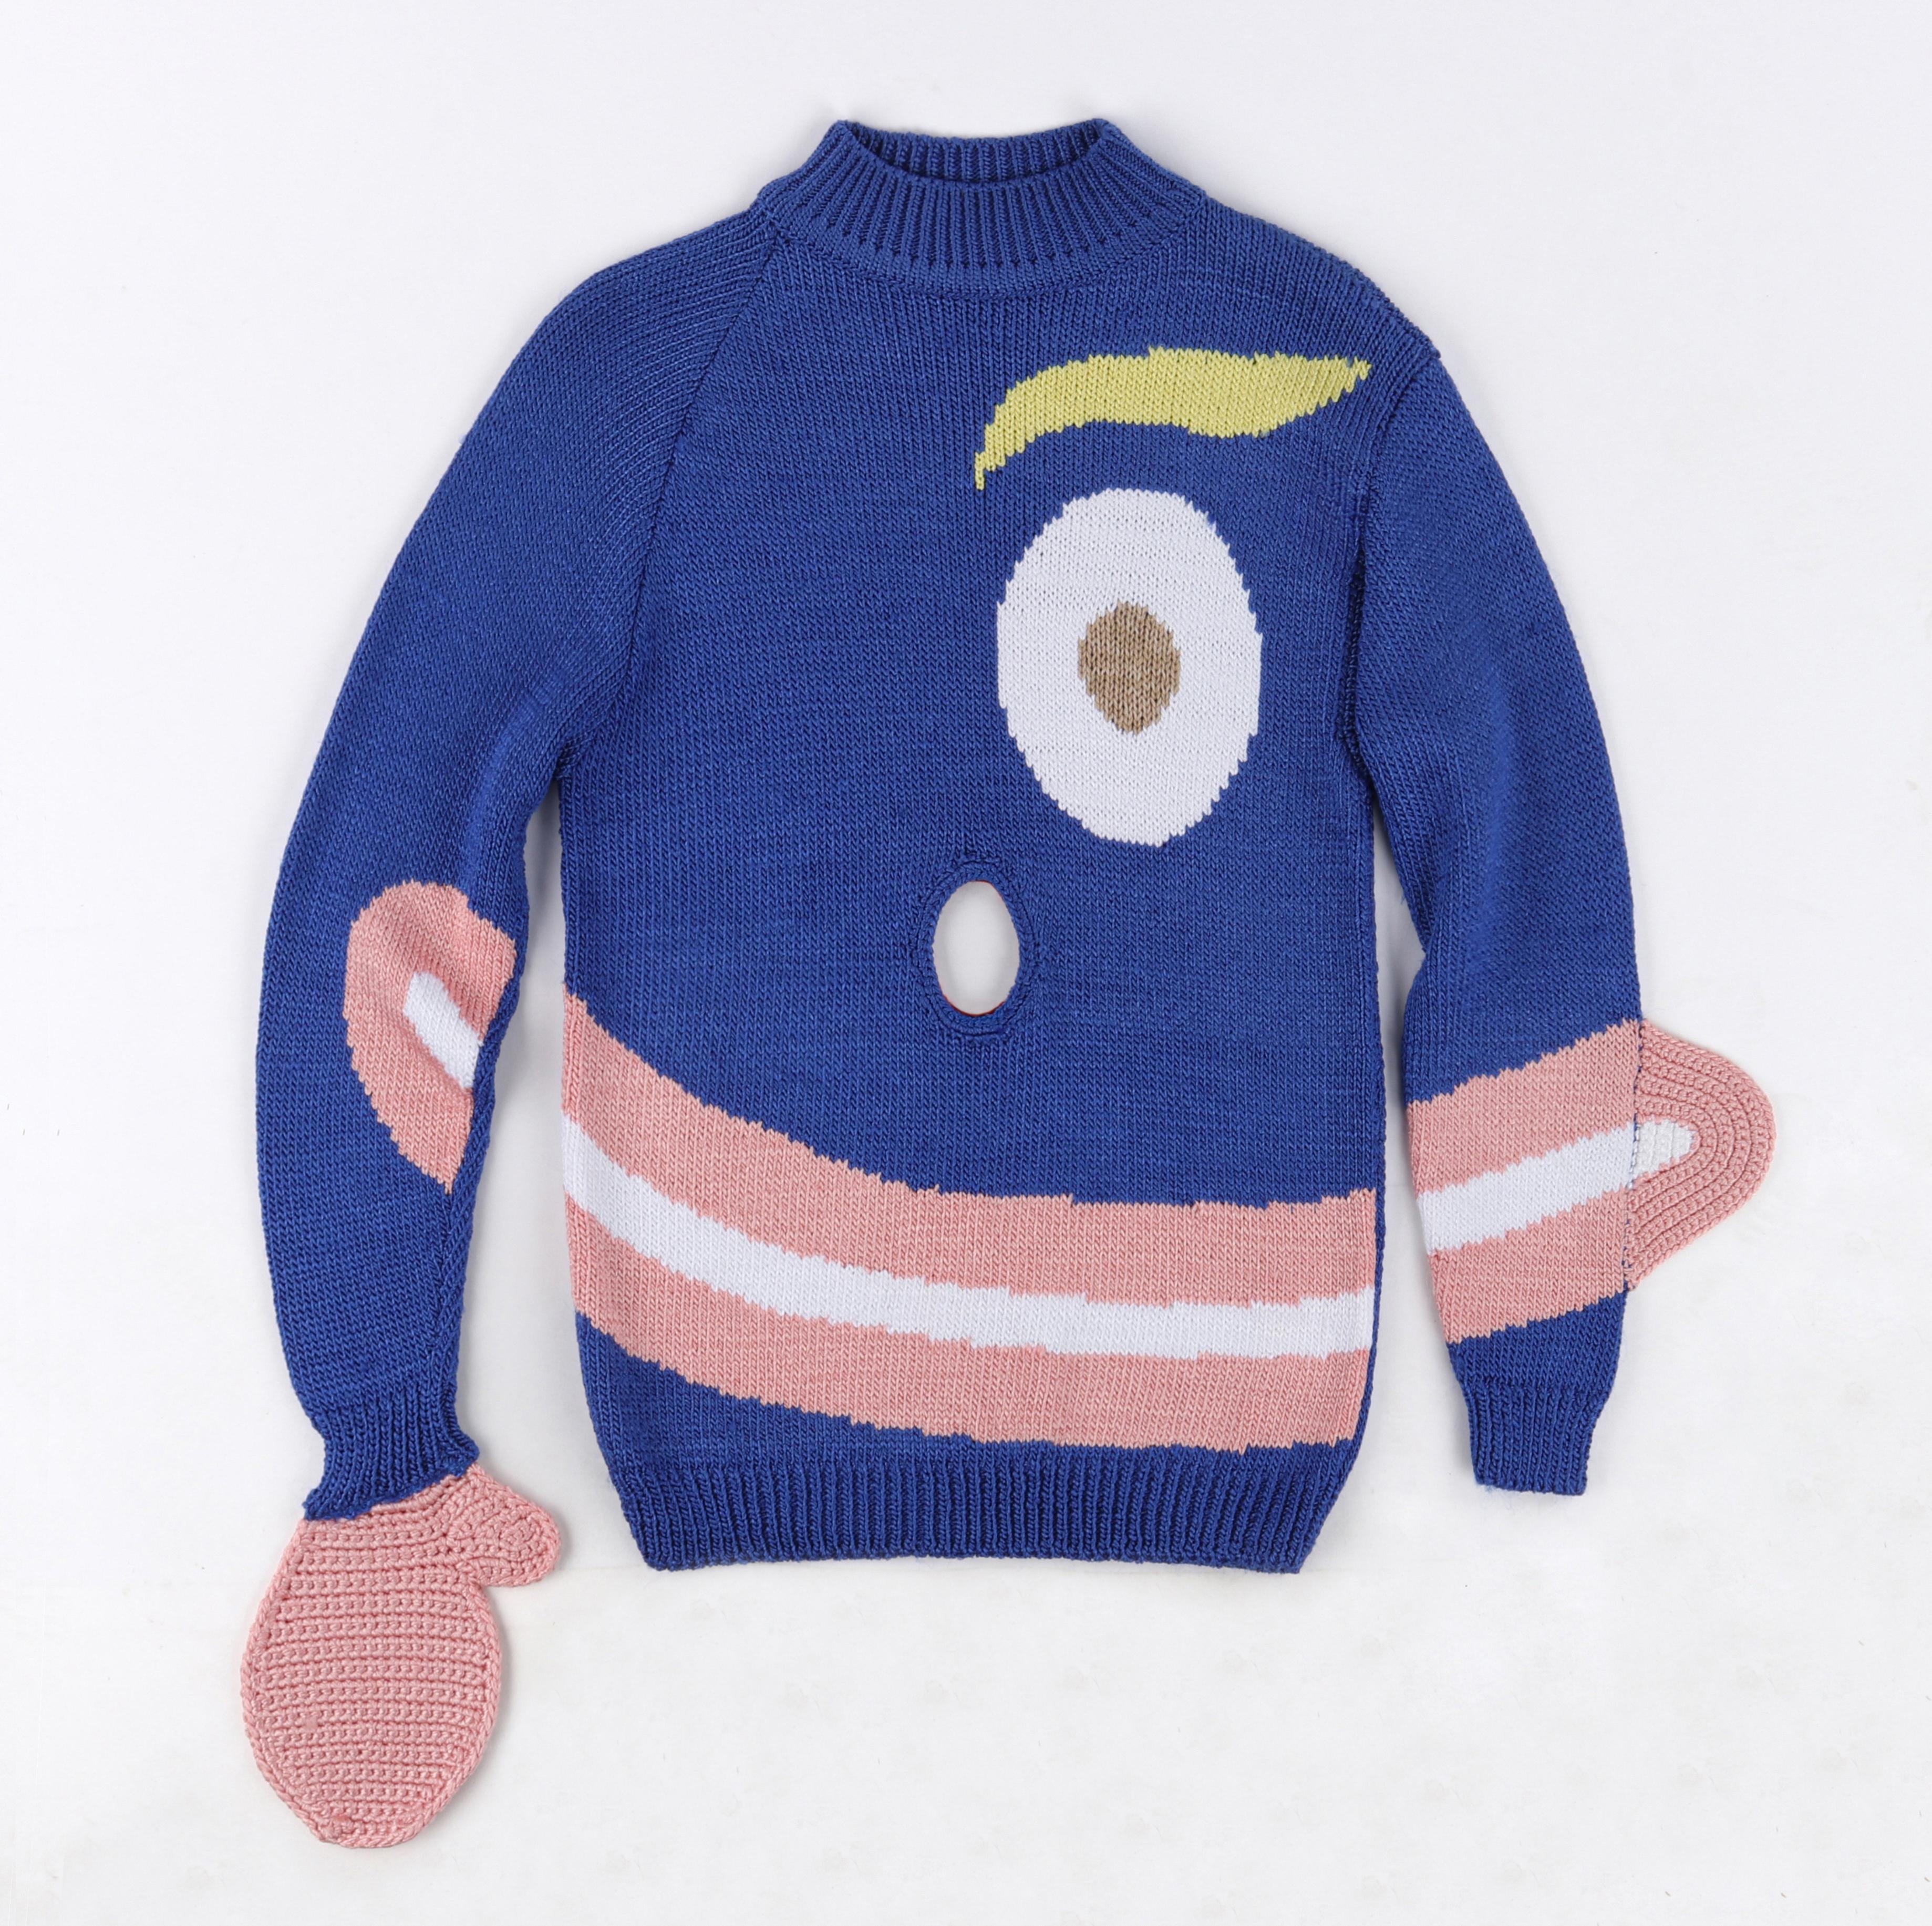 SURVIVAL OF THE FASHIONEST S/S 2020 Blue Knit Smiley Face Pullover Sweater Top

Marque / Fabricant : Survival of the Fashionest
Collectional : S/S 2020
Concepteur : Joost Jansen
Style : Pull-over
Couleur(s) : Nuances de bleu, blanc, rose, jaune,